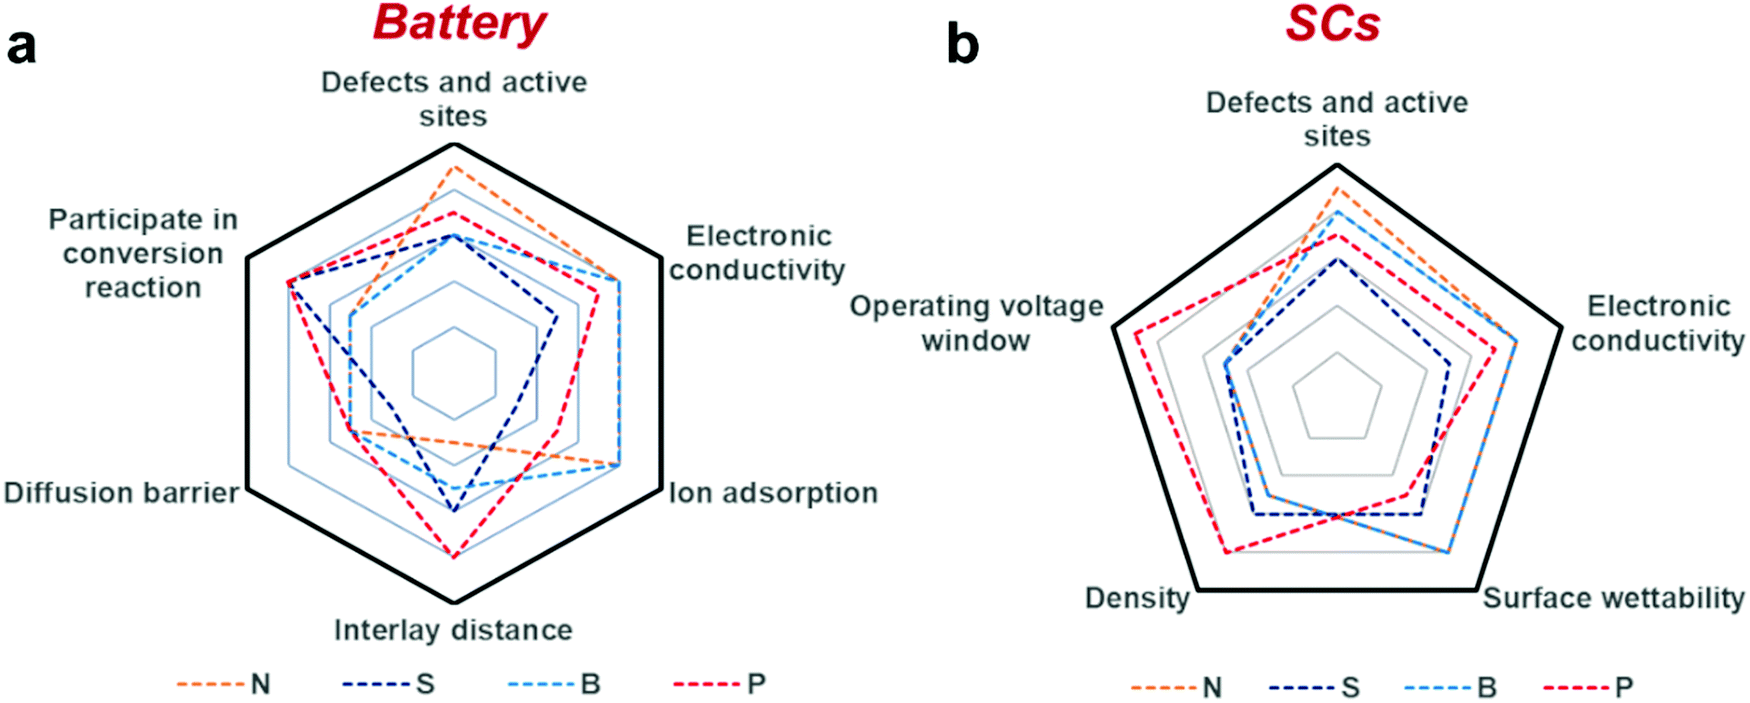 Untangling The Respective Effects Of Heteroatom Doped Carbon Materials In Batteries Supercapacitors And The Orr To Design High Performance Materials Energy Environmental Science Rsc Publishing